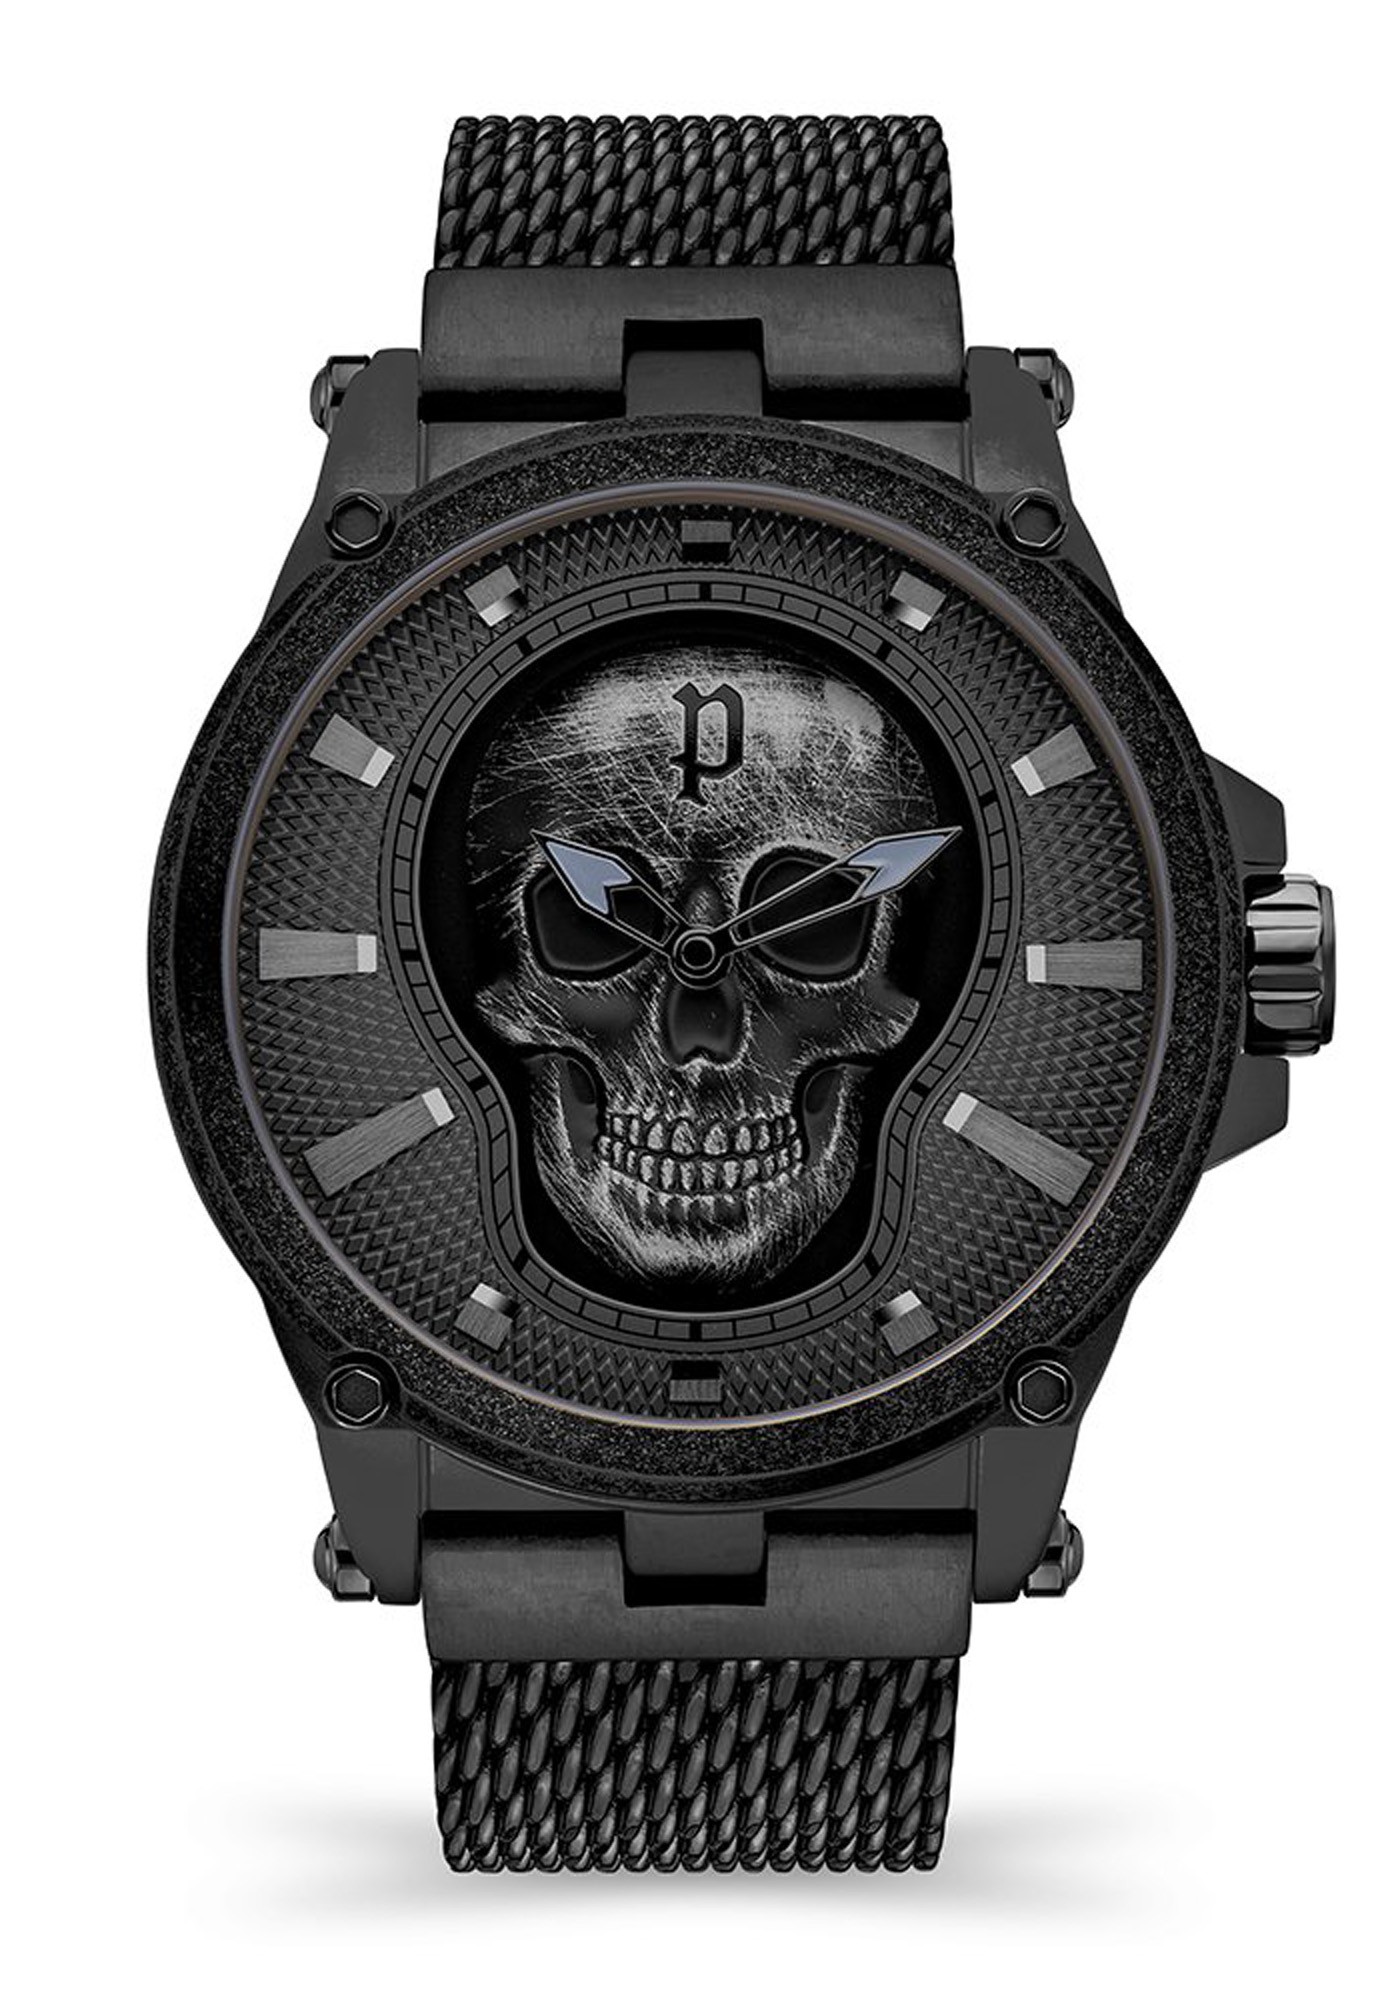 Police Men\'s Watches Watch Stainless Police Featuring Men\'s Vertex Watch Featuring PEWJG2108502 Black Stainless Watches Skull Skull | Men\'s on Steel Dial Watch Comprar Black on 152230 Police Dial Vertex Watch Steel